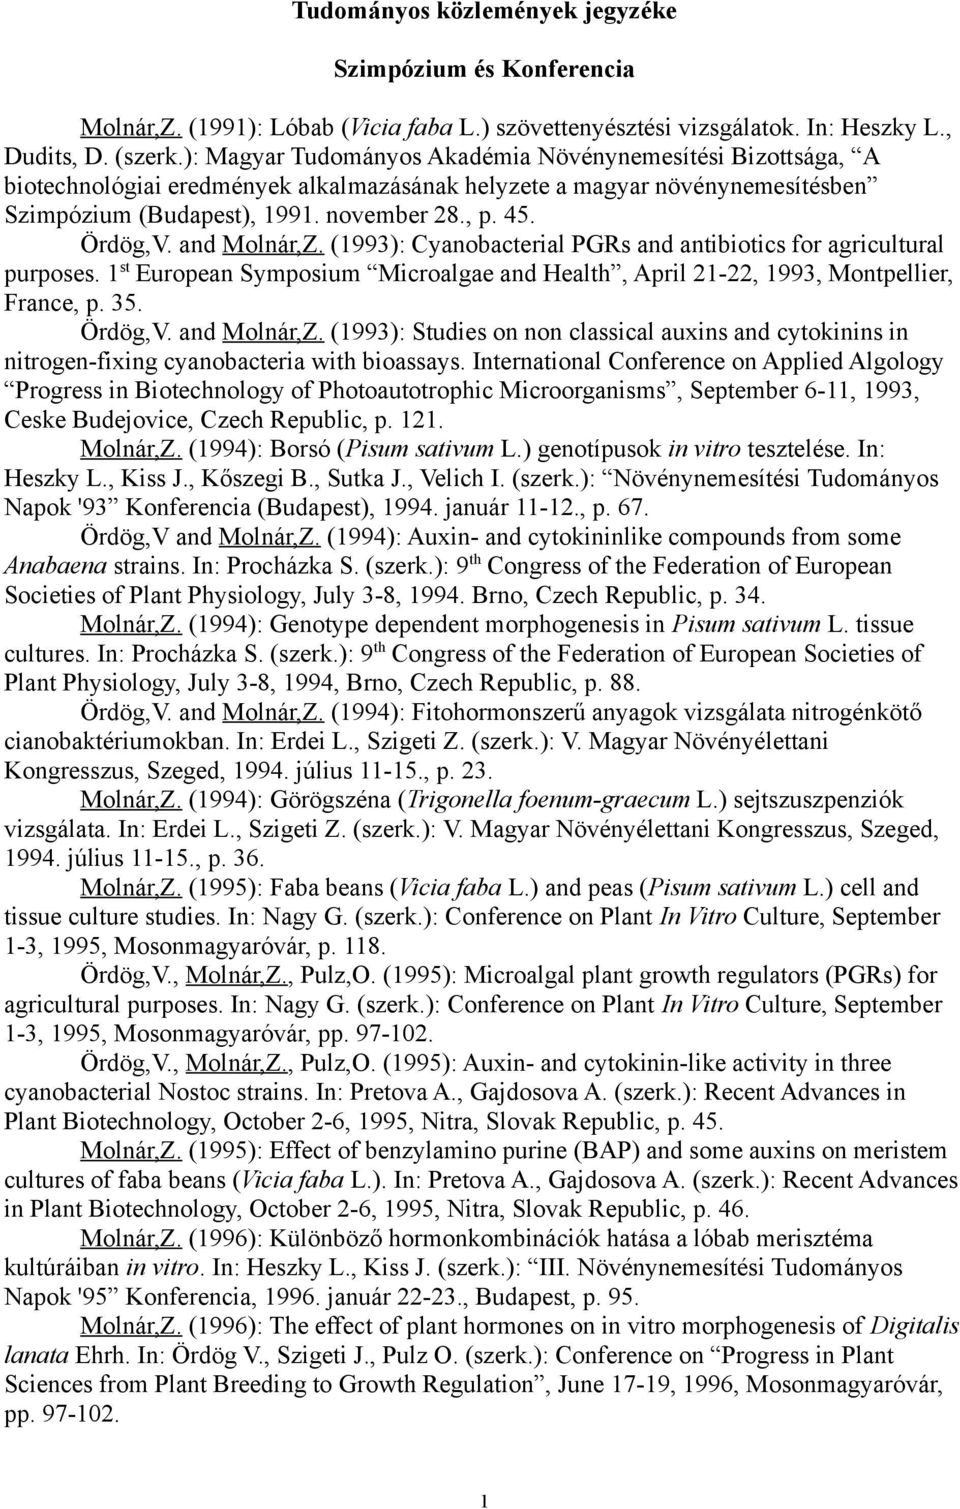 and Molnár,Z. (1993): Cyanobacterial PGRs and antibiotics for agricultural purposes. 1 st European Symposium Microalgae and Health, April 21-22, 1993, Montpellier, France, p. 35. Ördög,V.